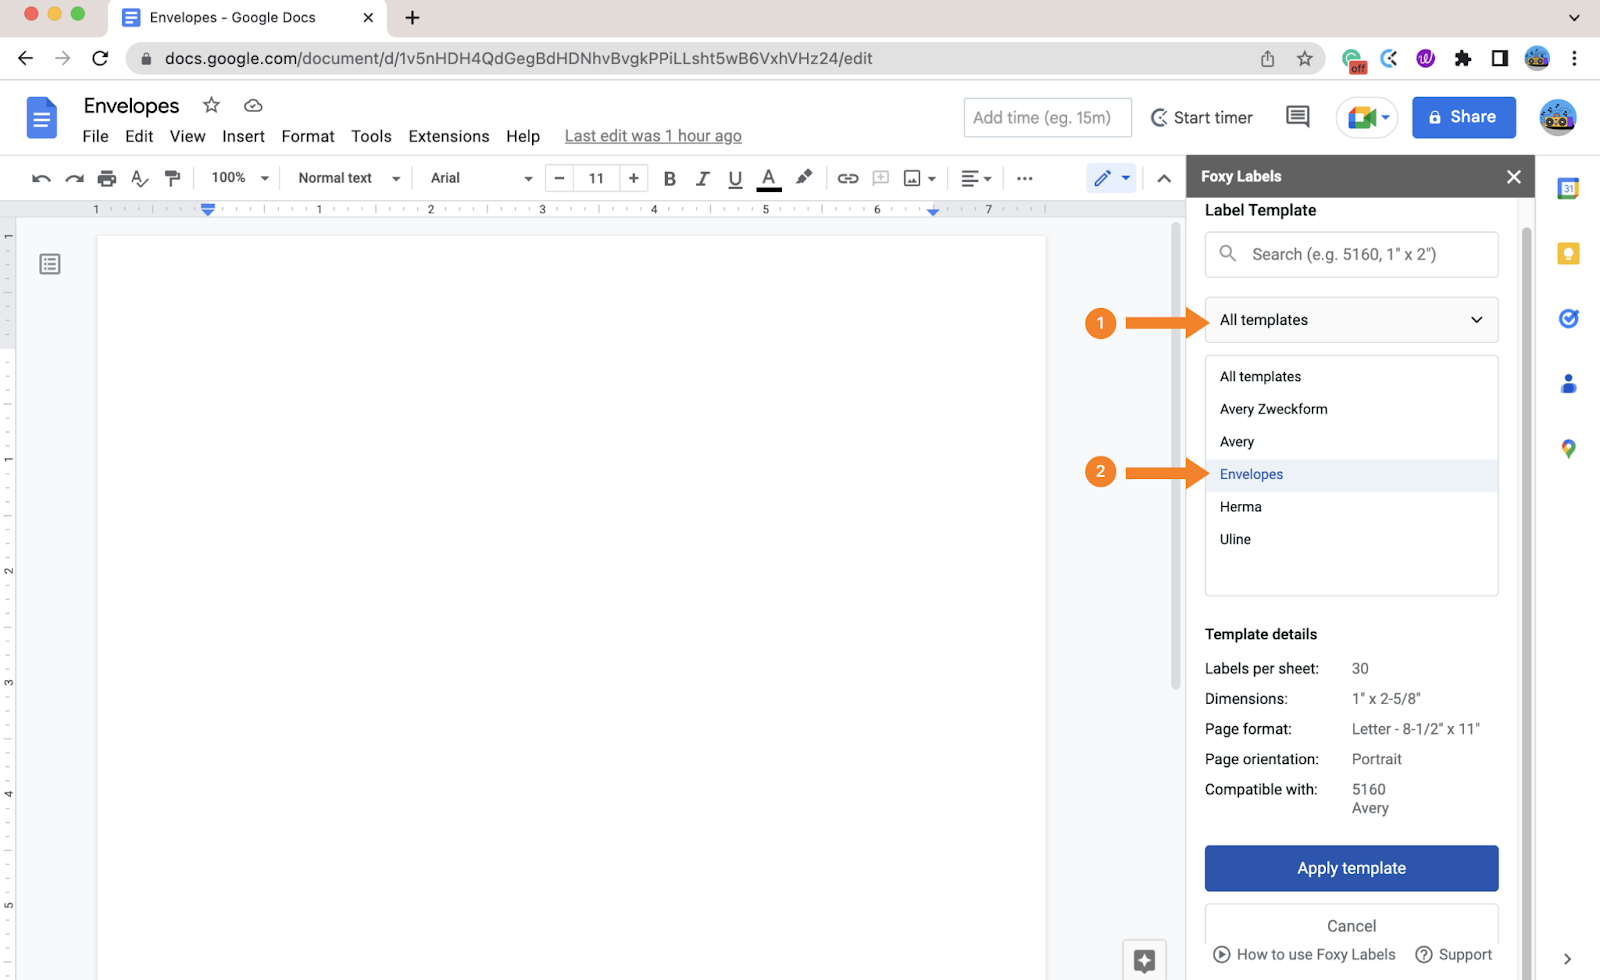 how-to-print-customized-envelopes-with-a-logotype-in-google-docs